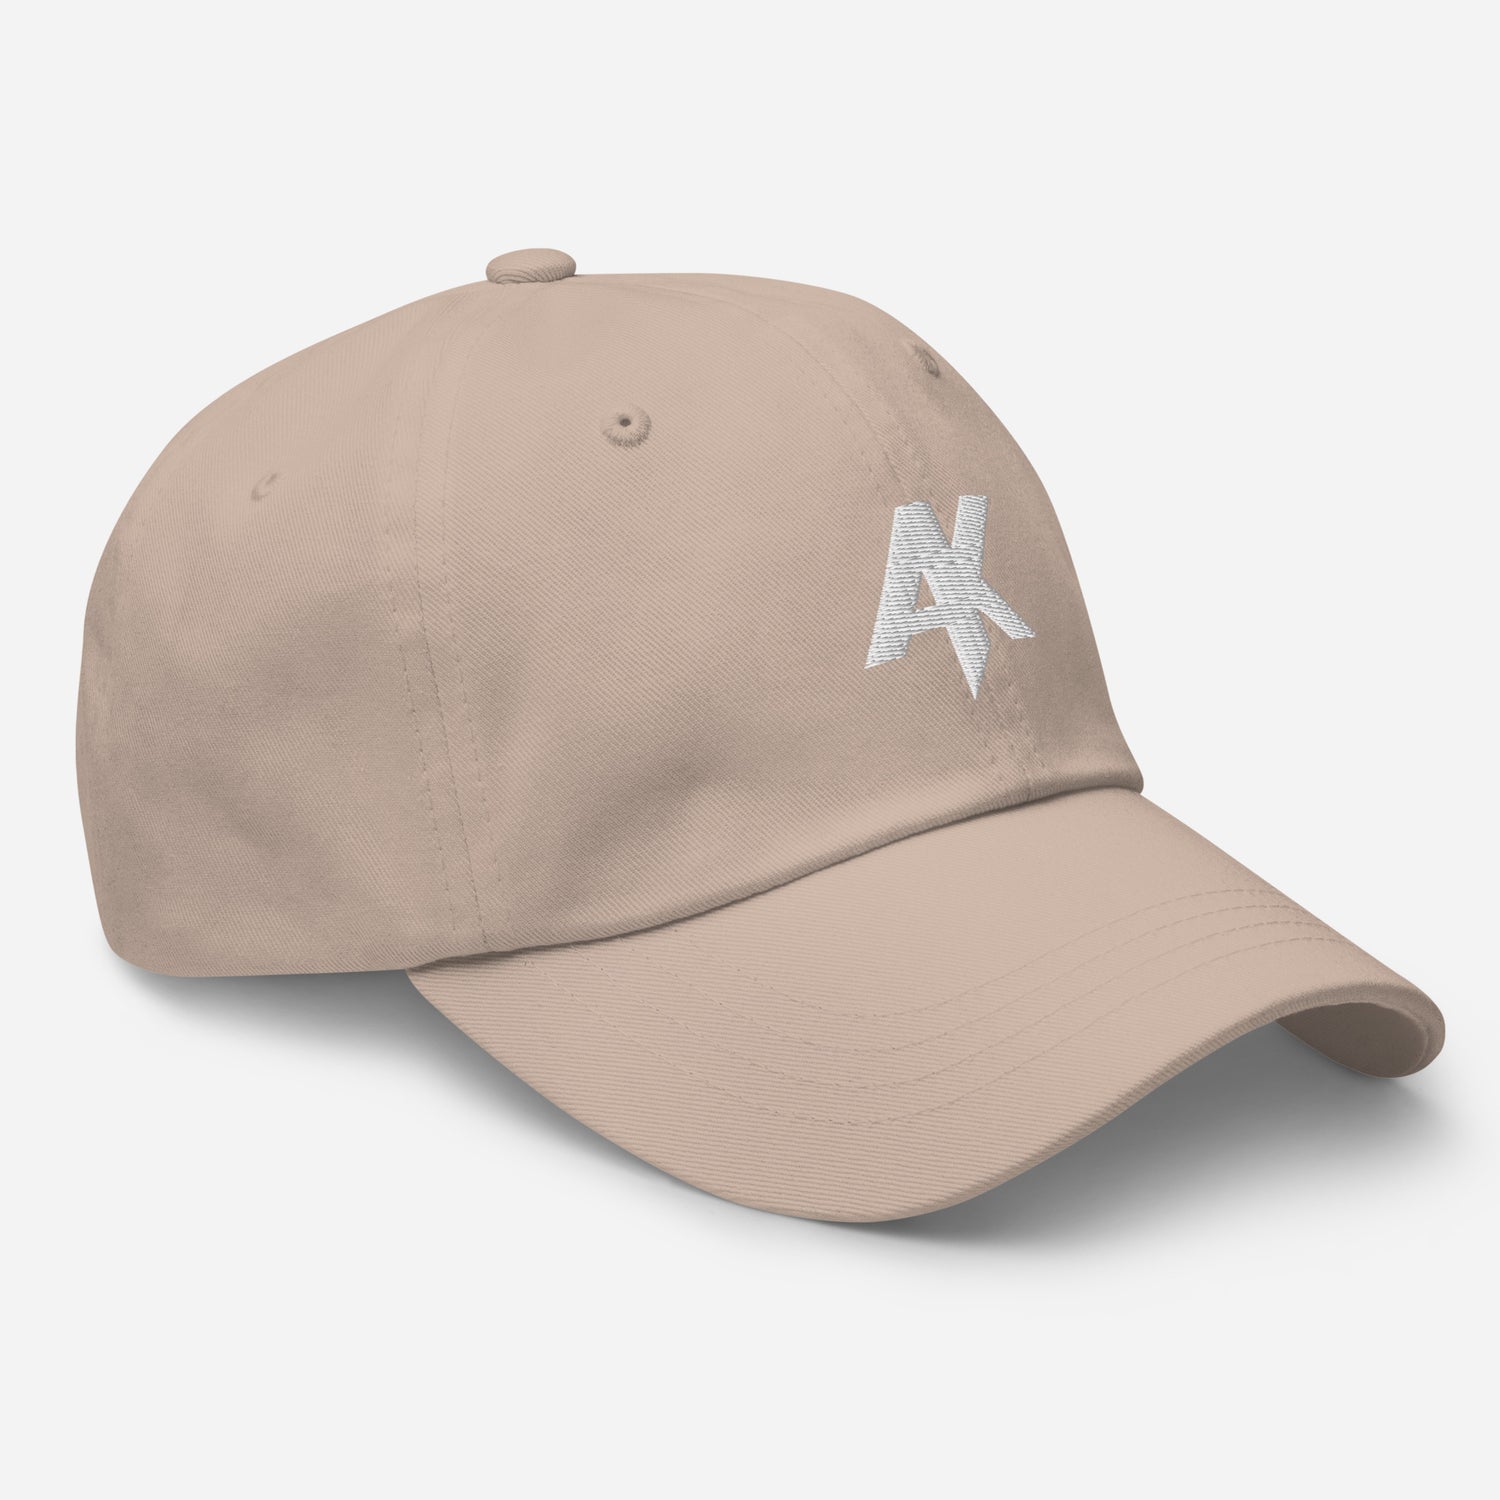 Anthony Kendall "Signature" hat - Fan Arch